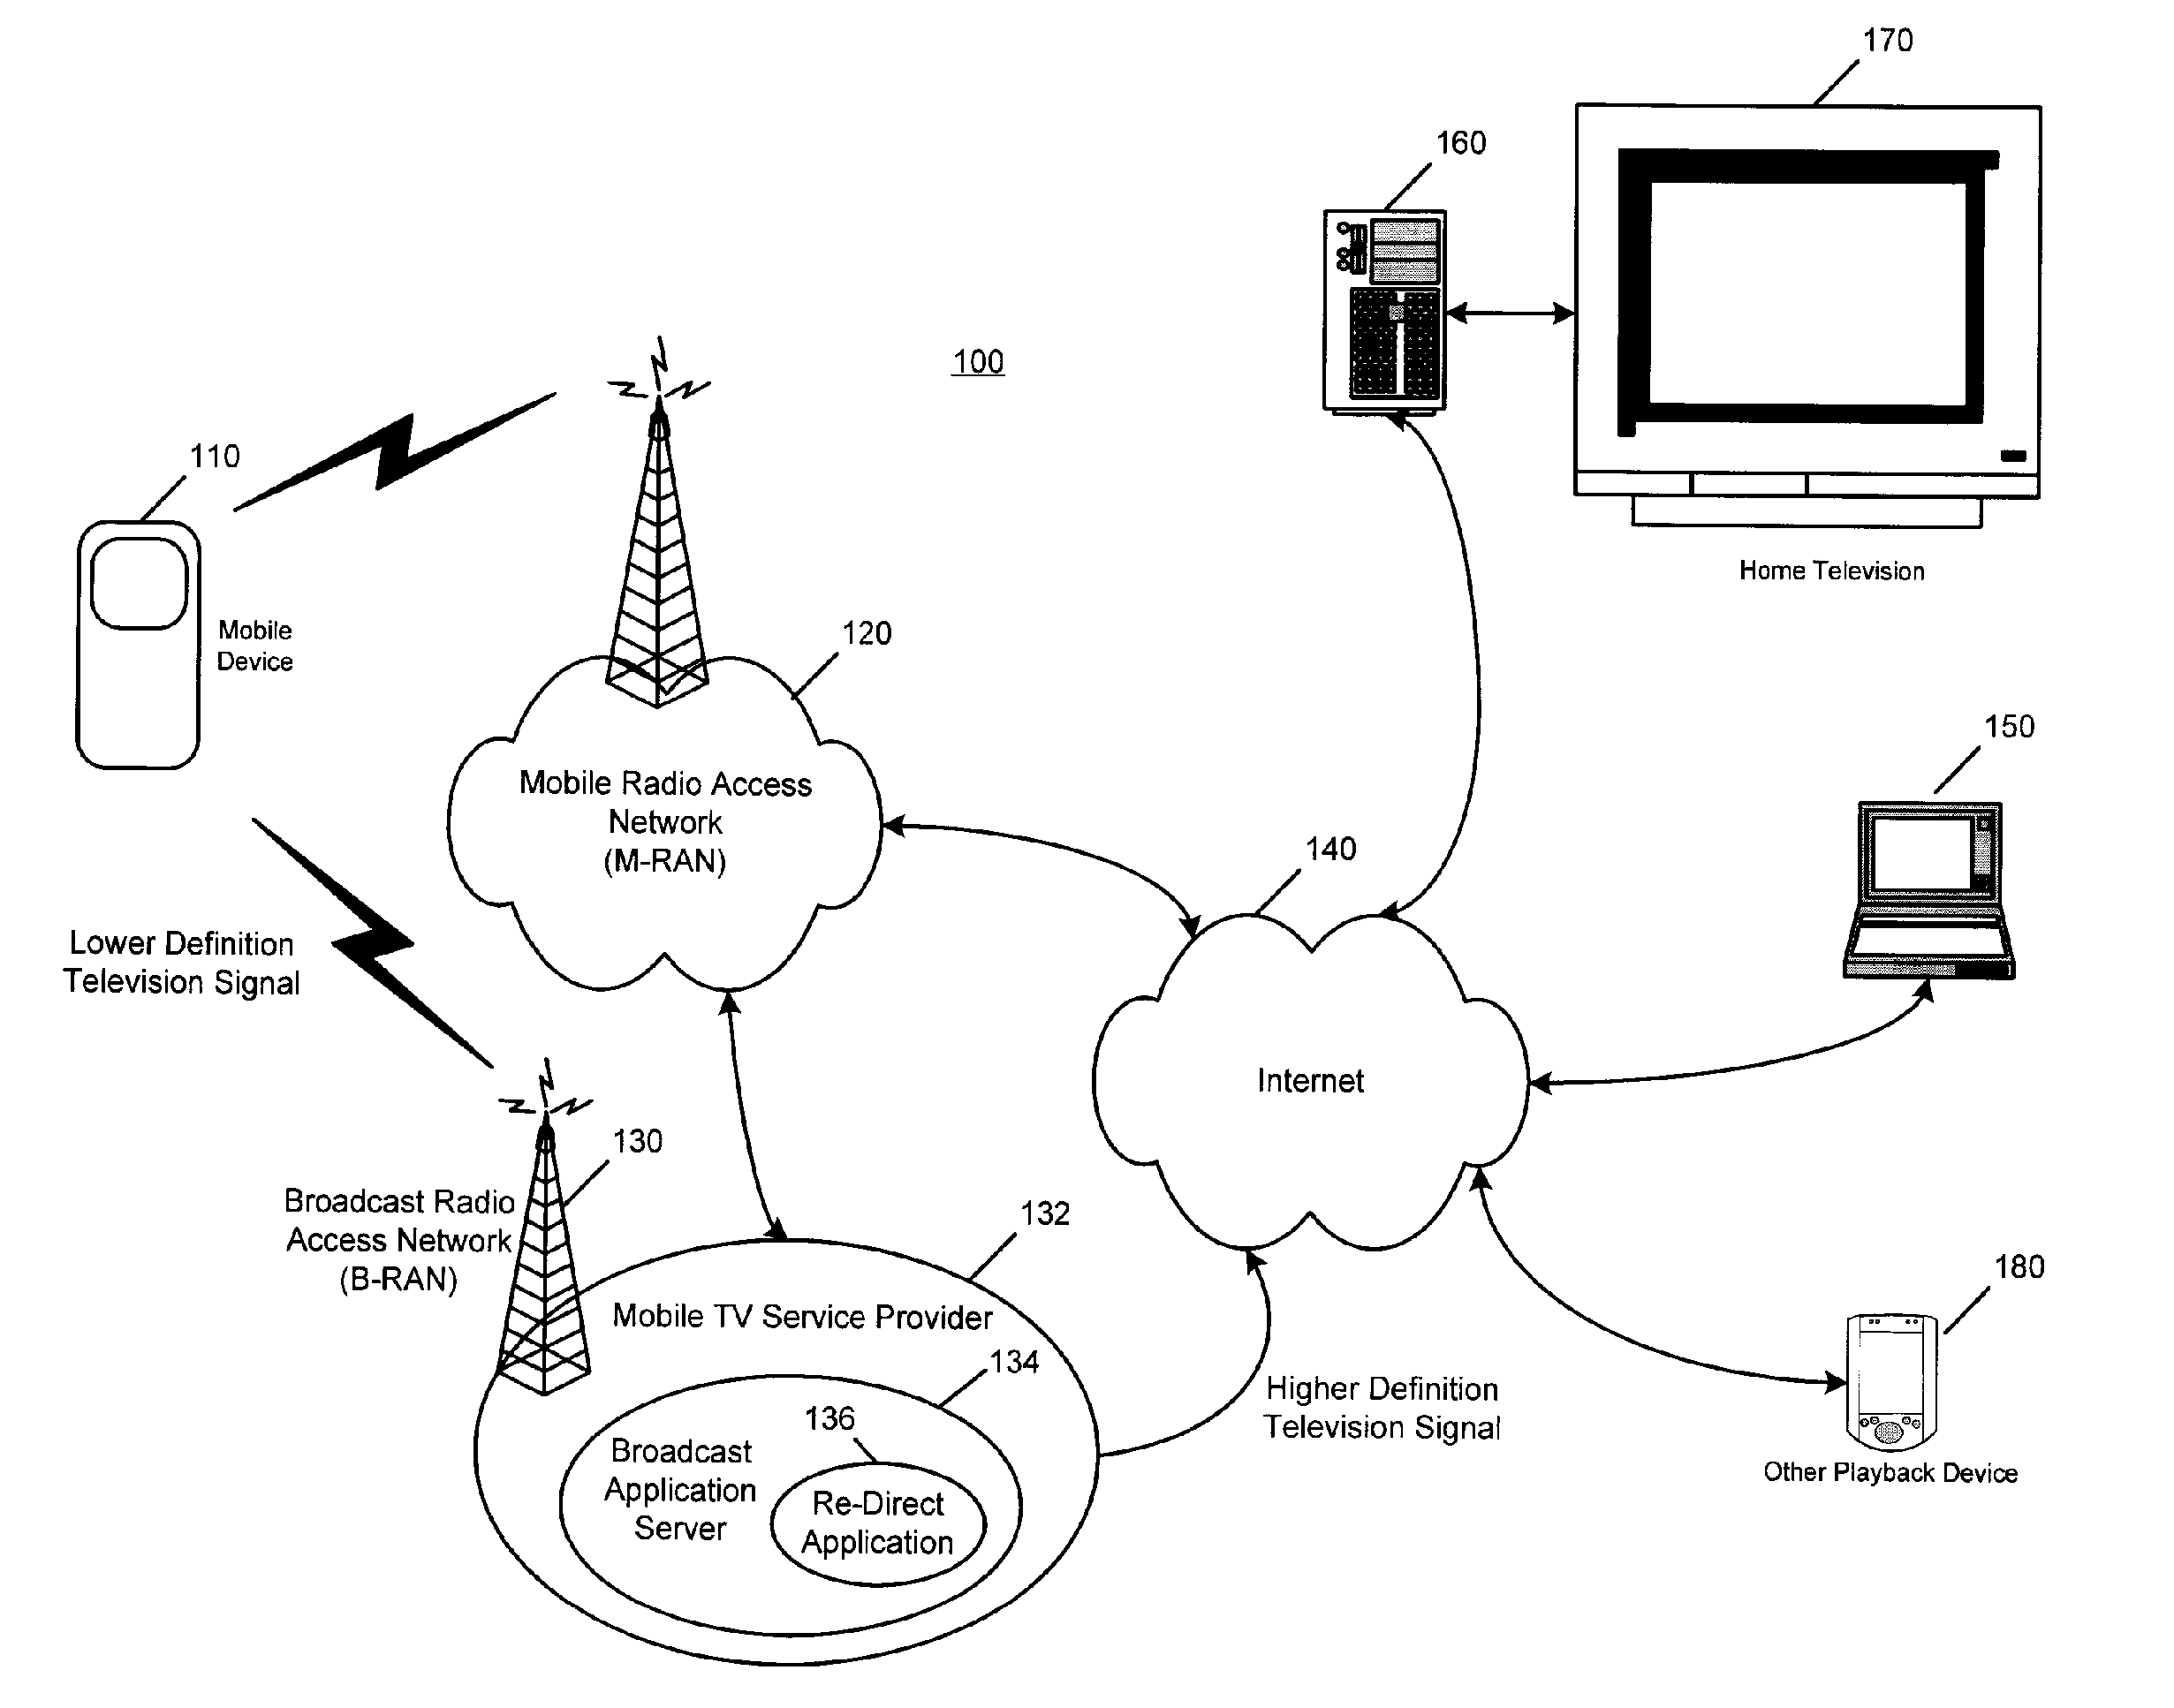 Mobile device control of mobile television broadcast signals to alternate destinations